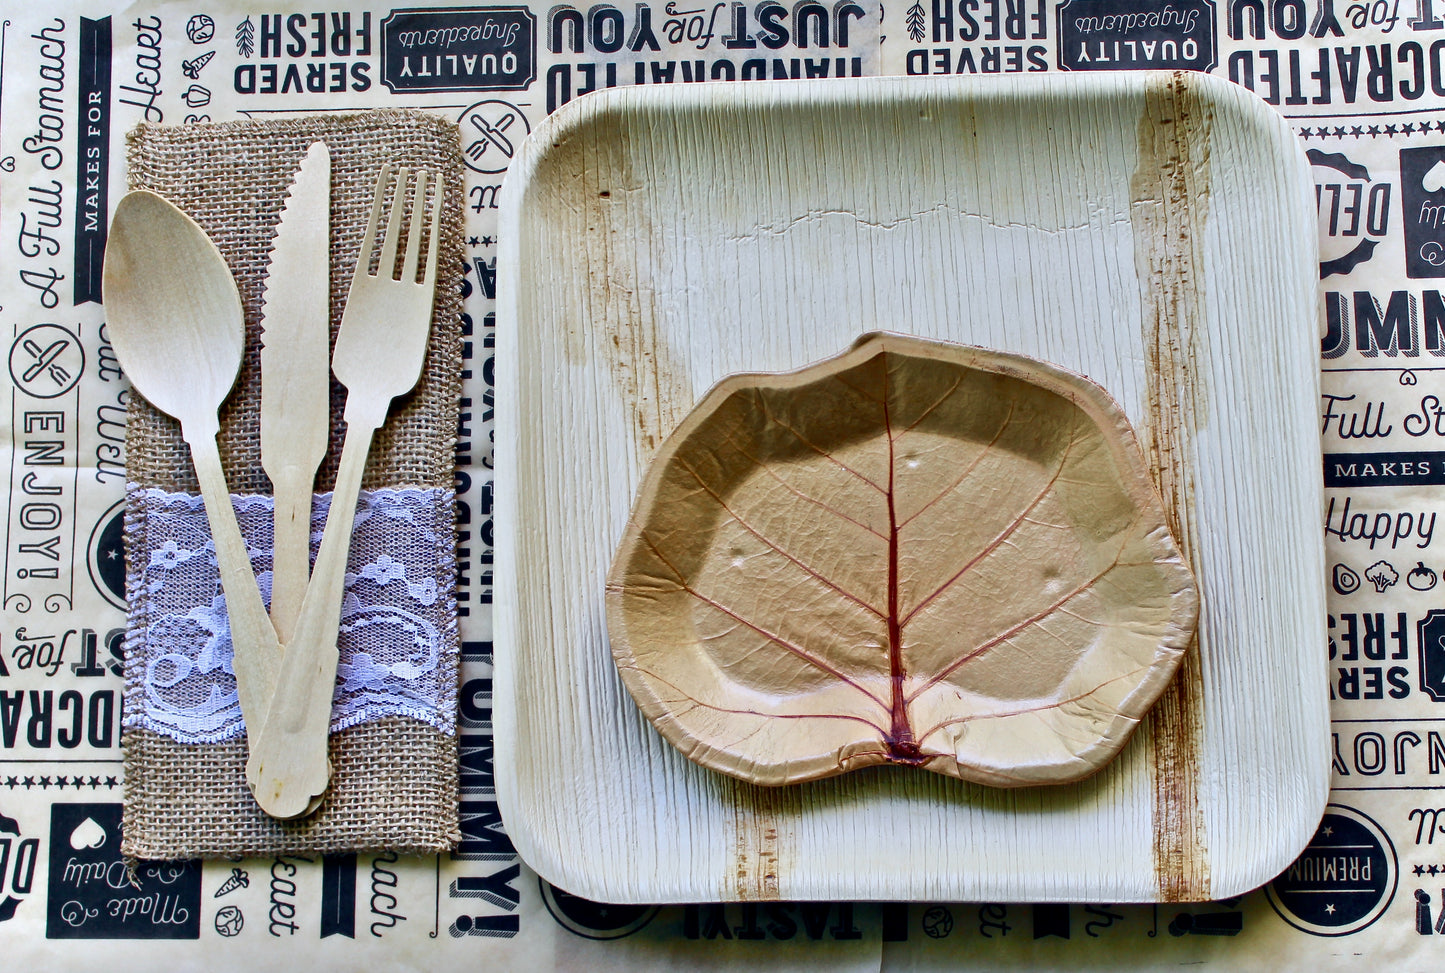 Palm Leaf Plate 100  Pic 10" Square and 300   Spoon - Knife - Fork    Disposable - Biodegradable - good for Dessert